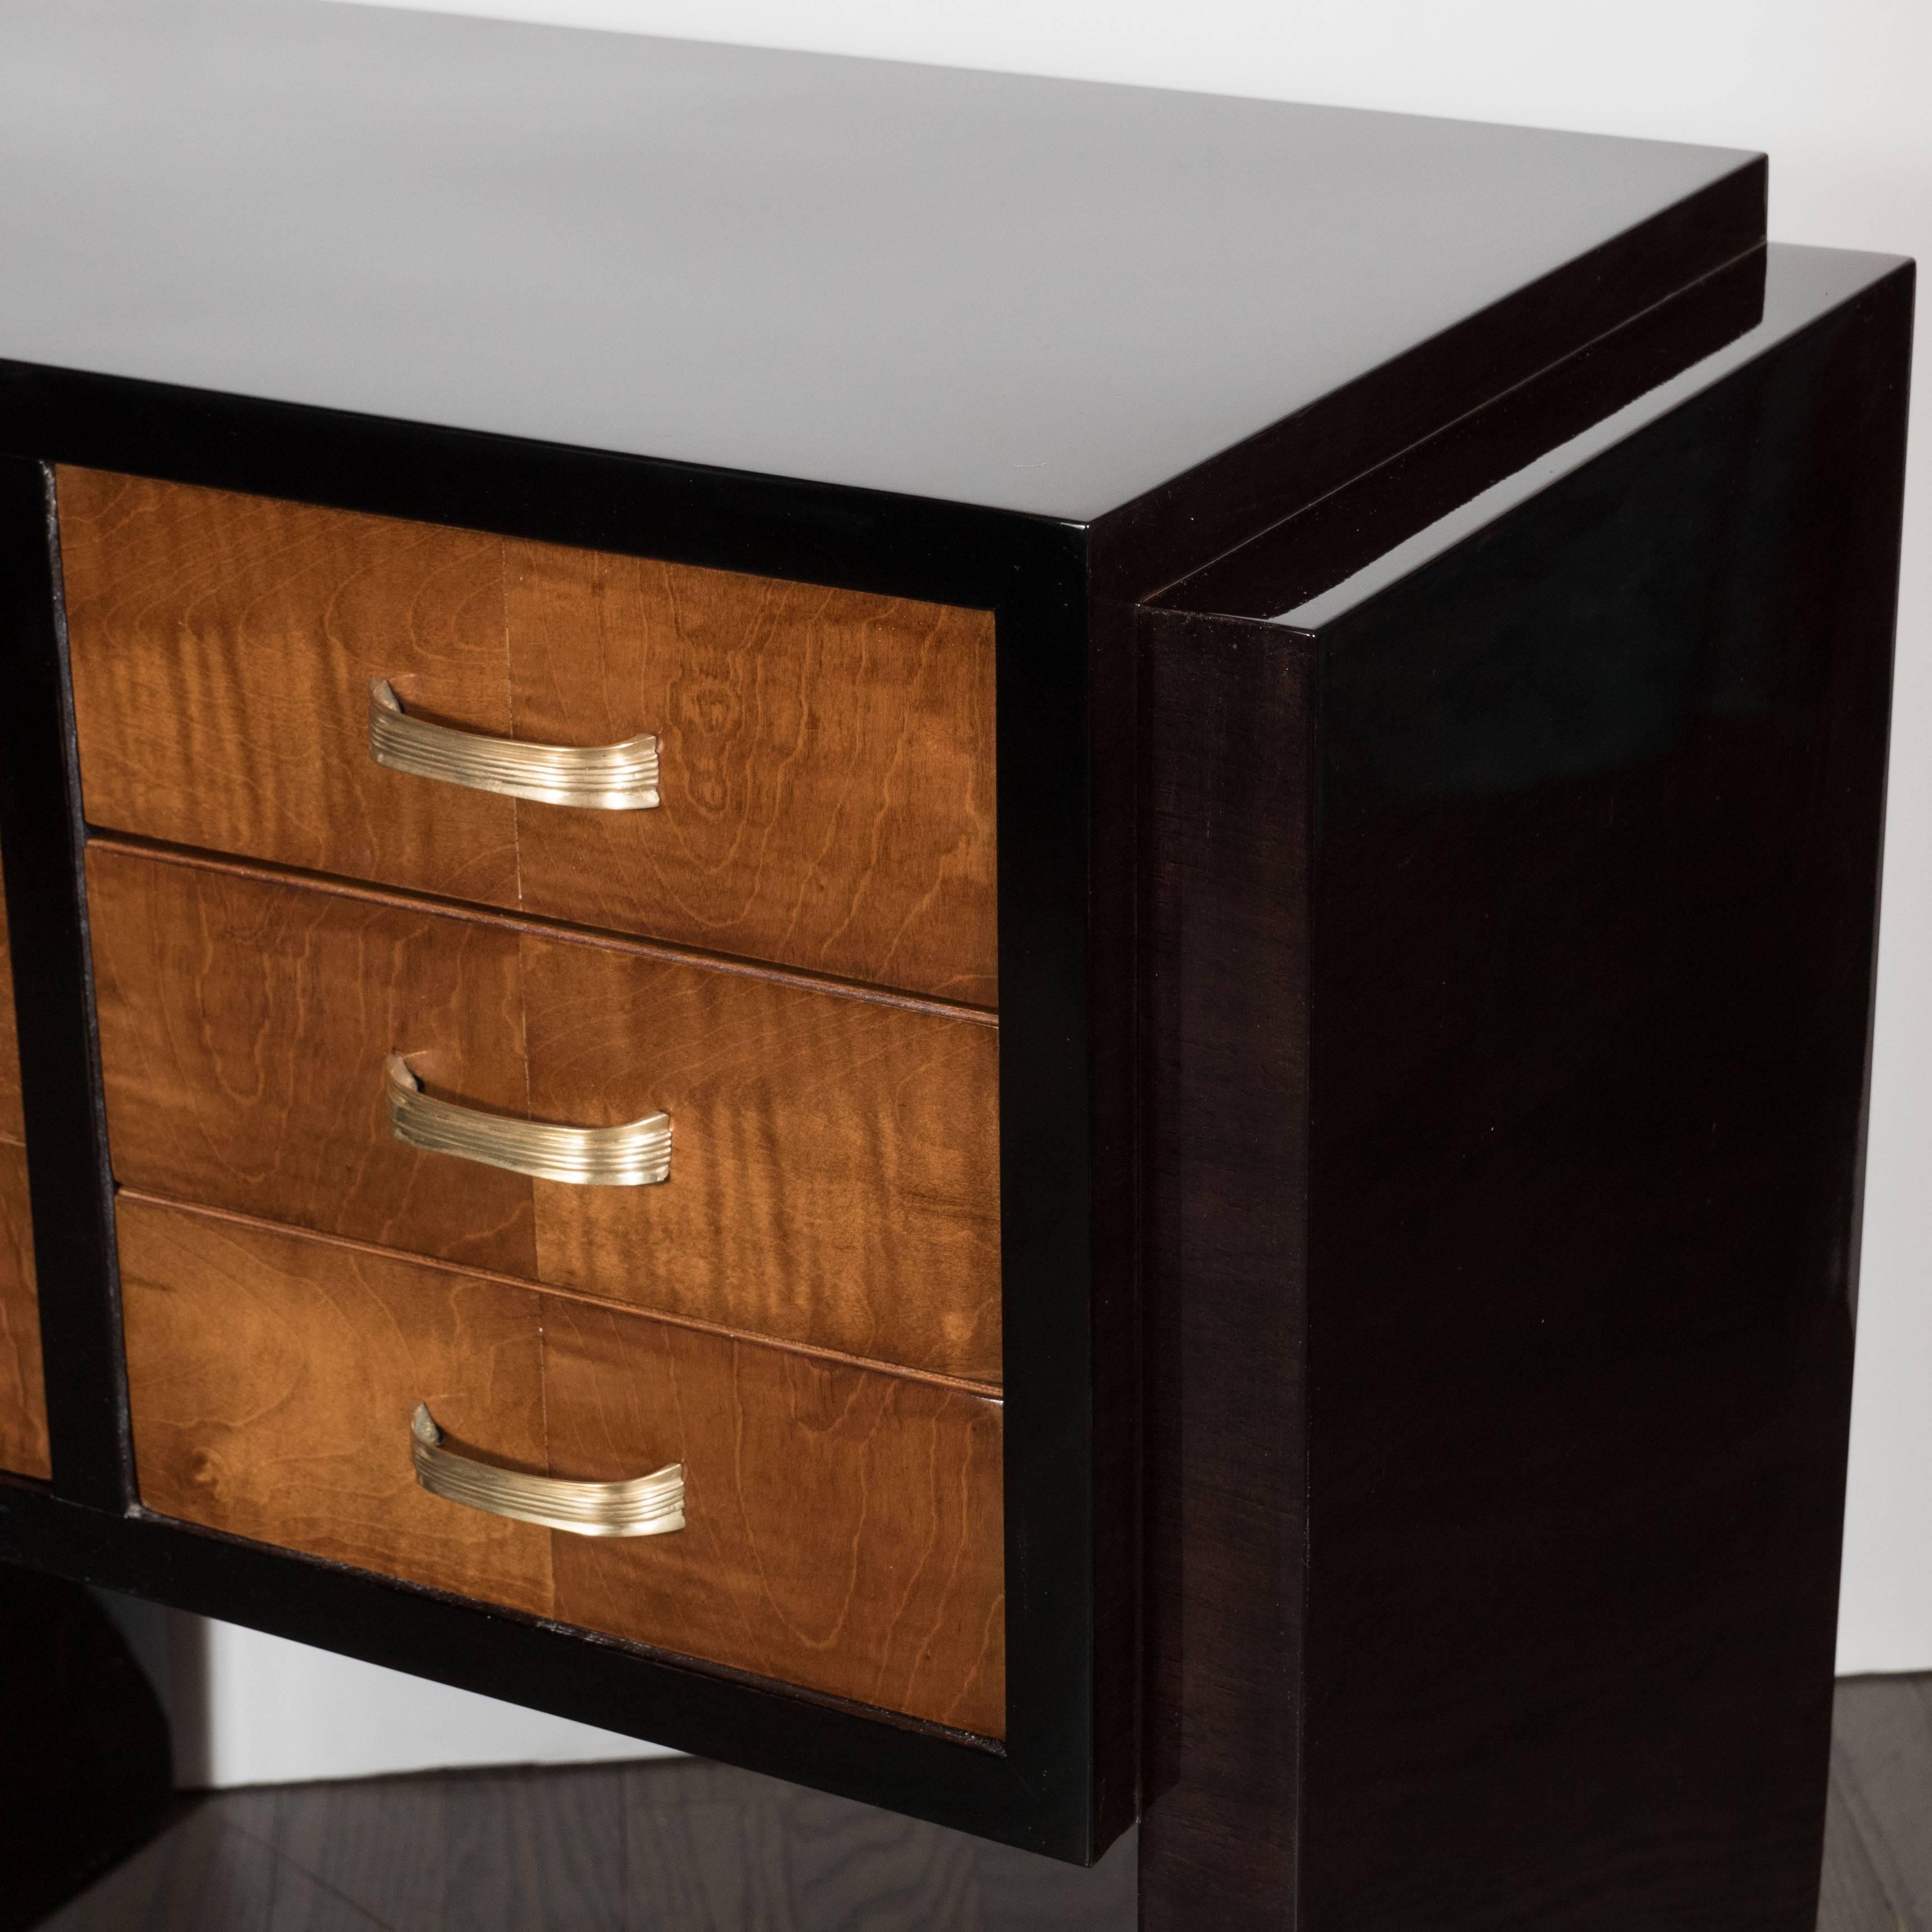 Brass Pair of Art Deco Nightstands or End Tables in Burled Elm and Ebonized Walnut